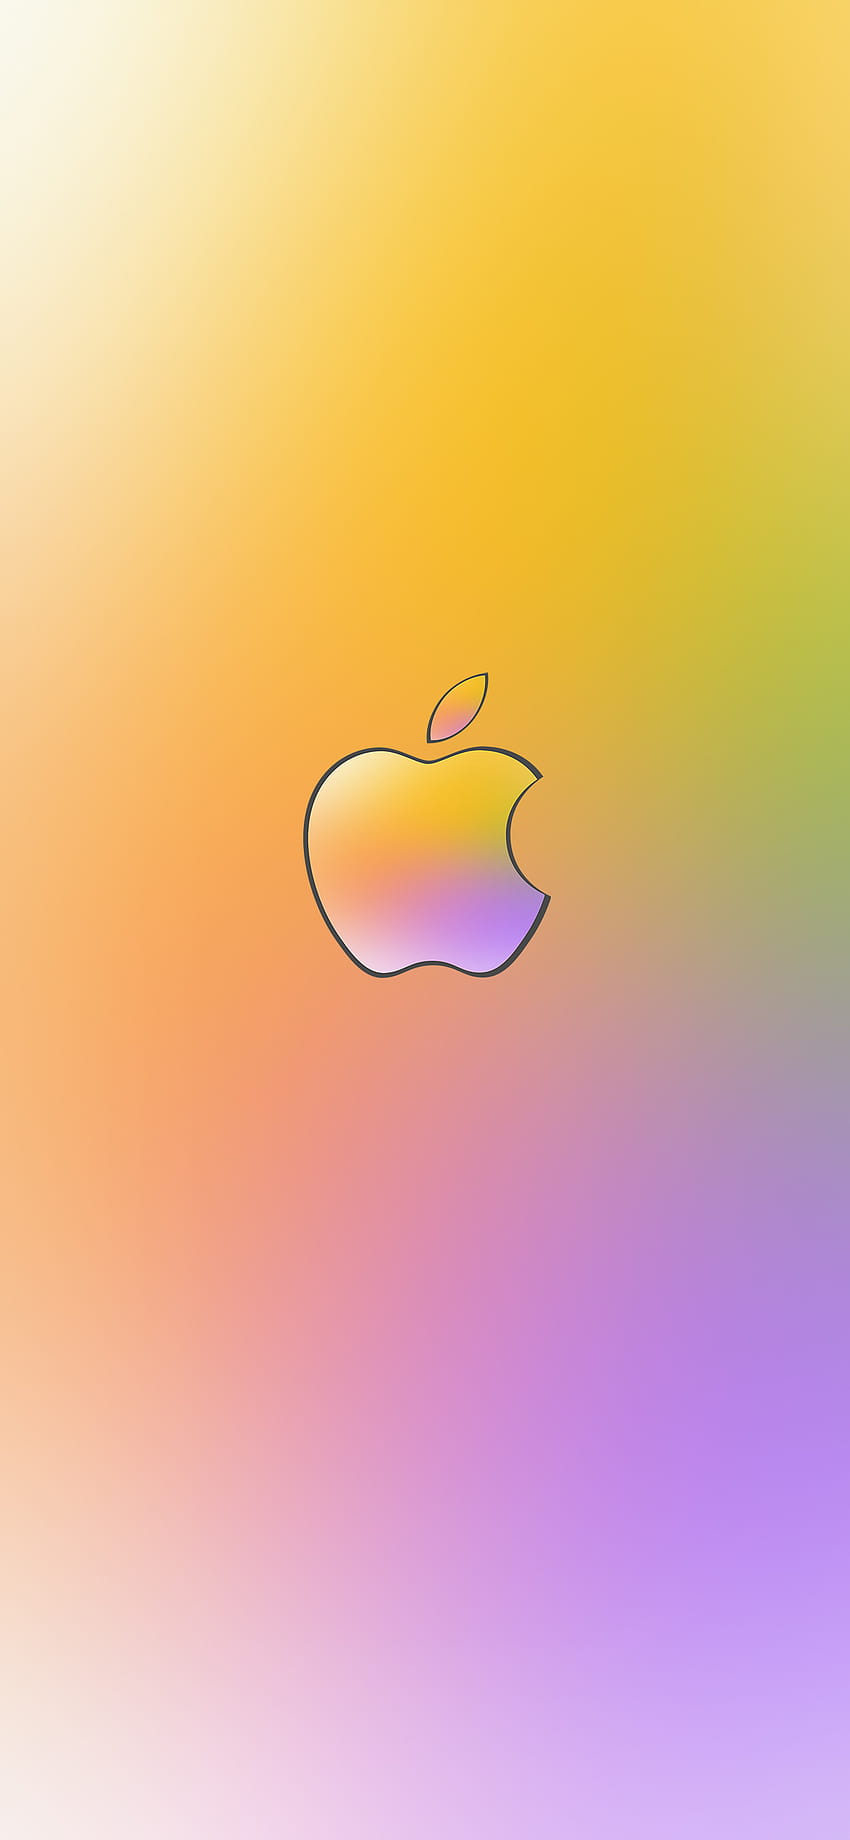 Apple Card for iPhone, iPad, and HD phone wallpaper | Pxfuel